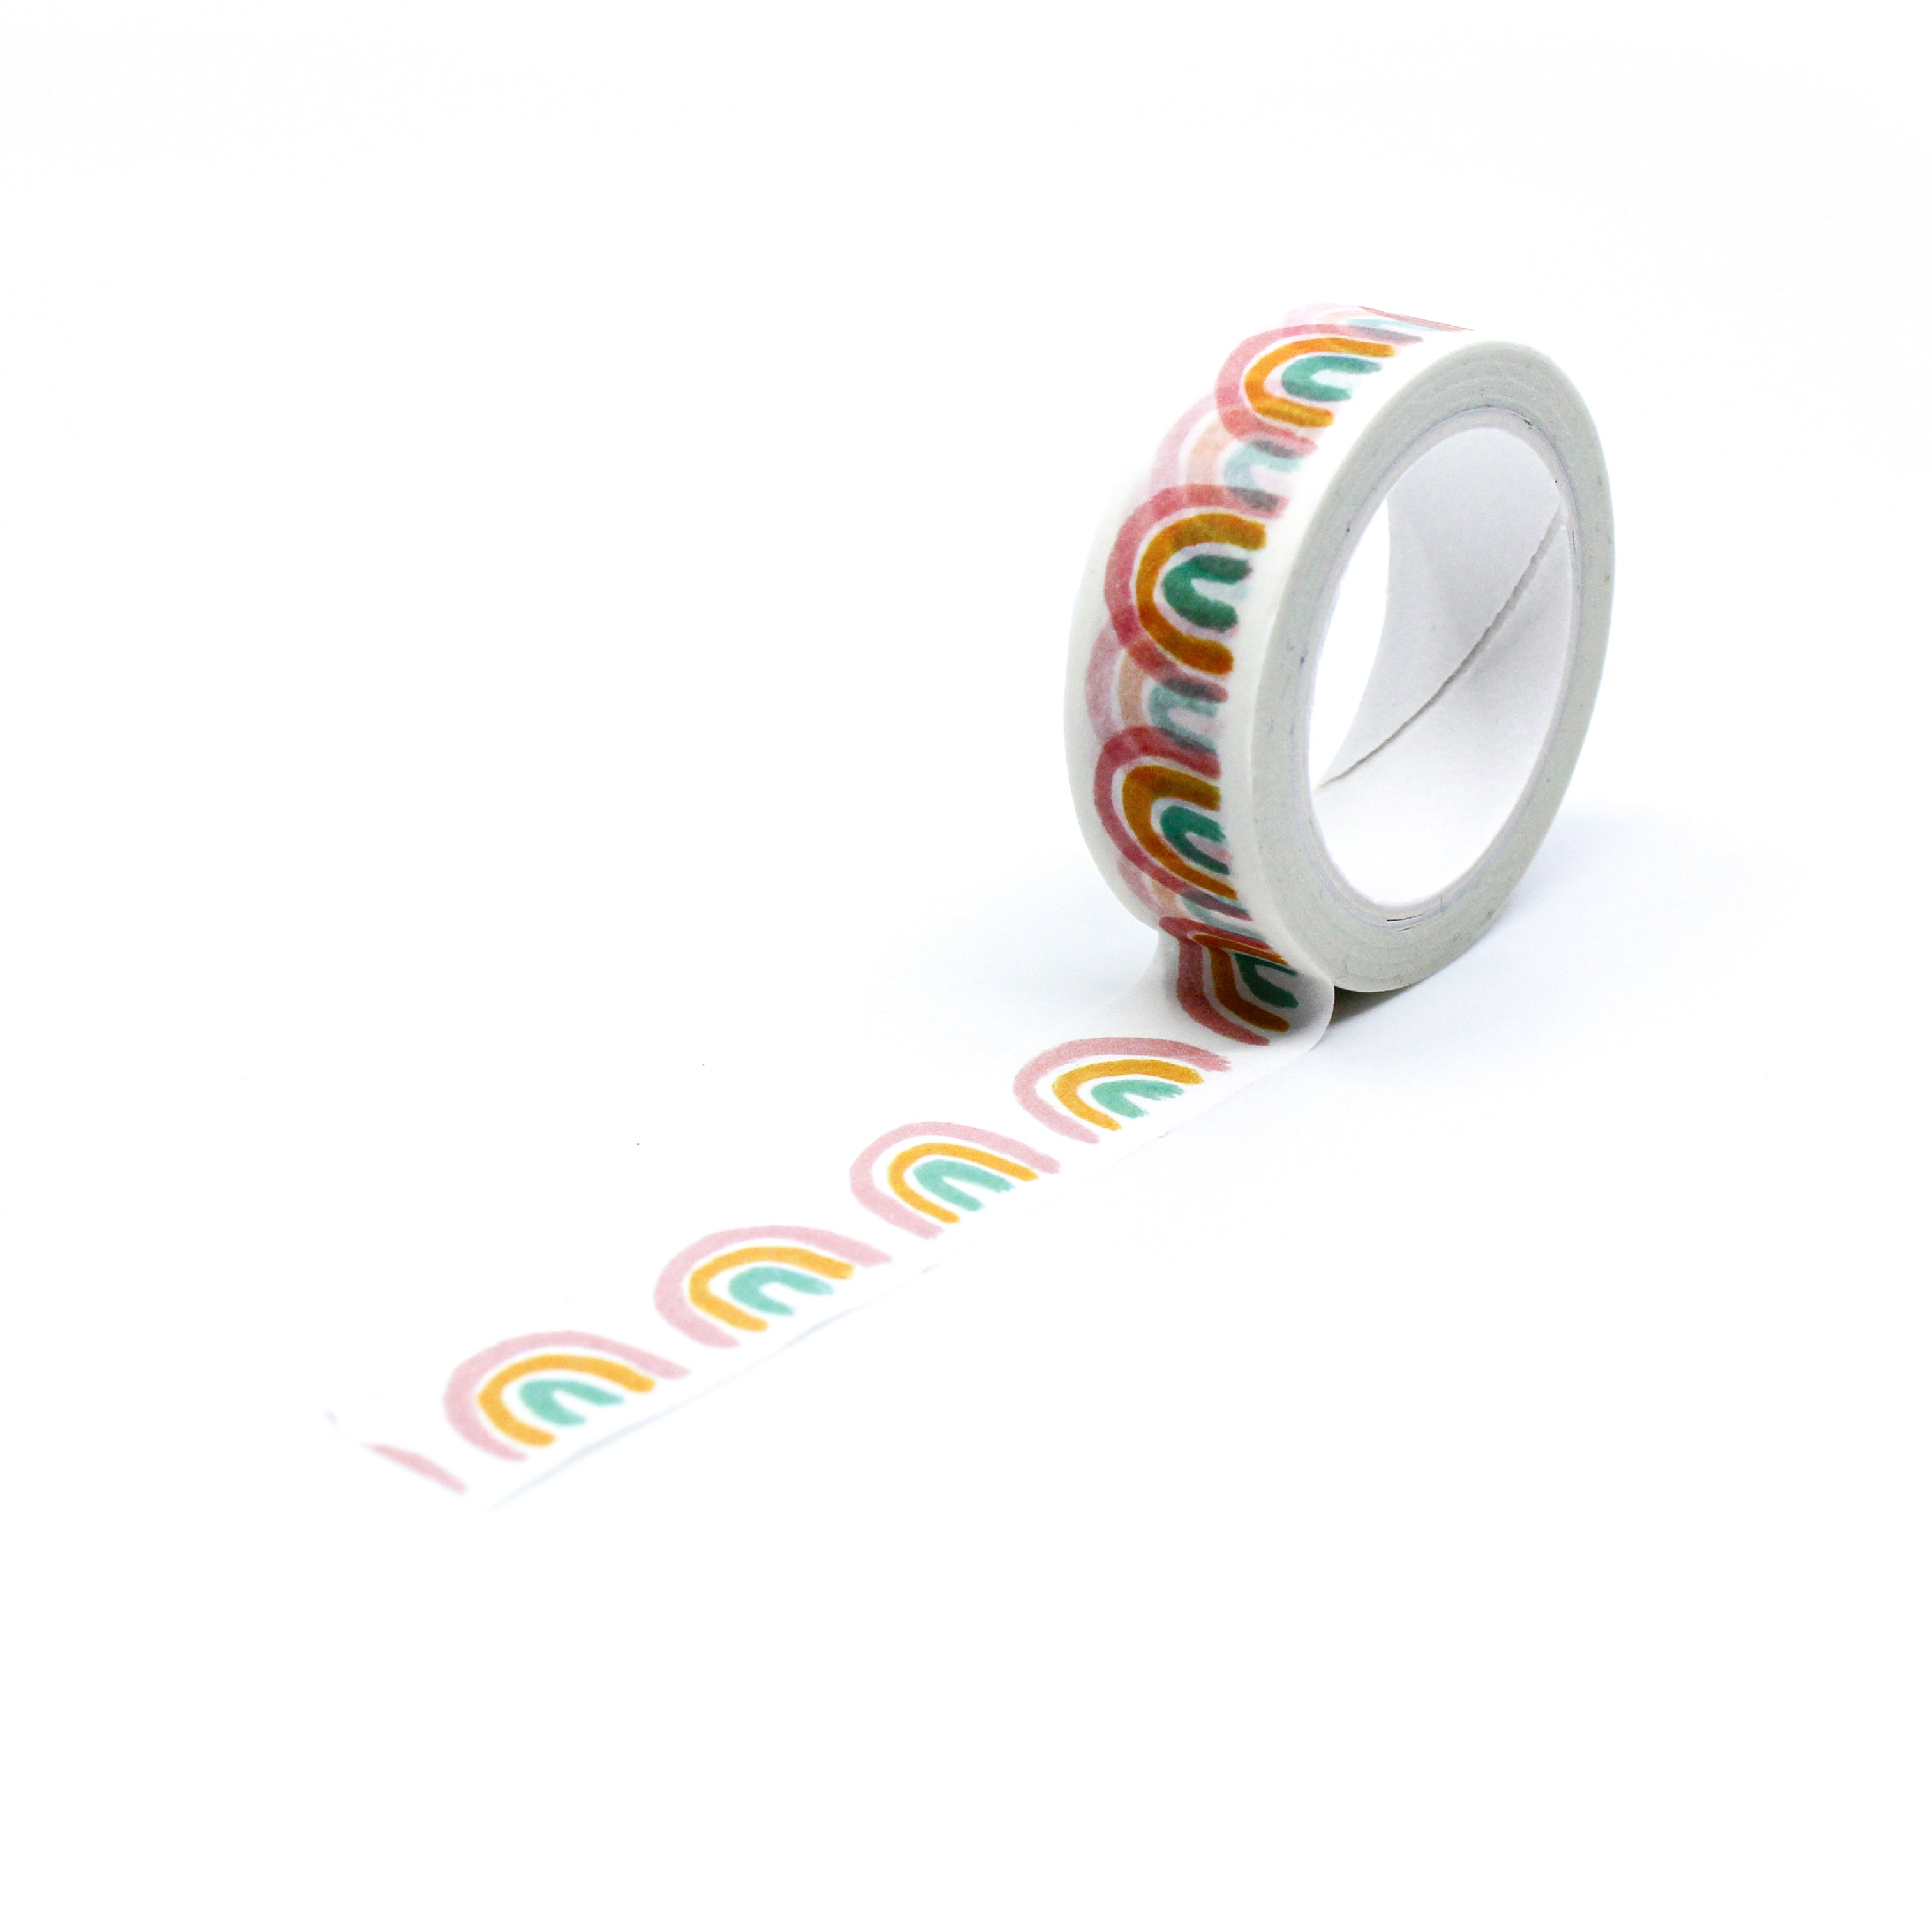 This is full pattern repeat of our fun and colorful pastel rainbow pattern washi tape from BBB Supplies Craft Shop